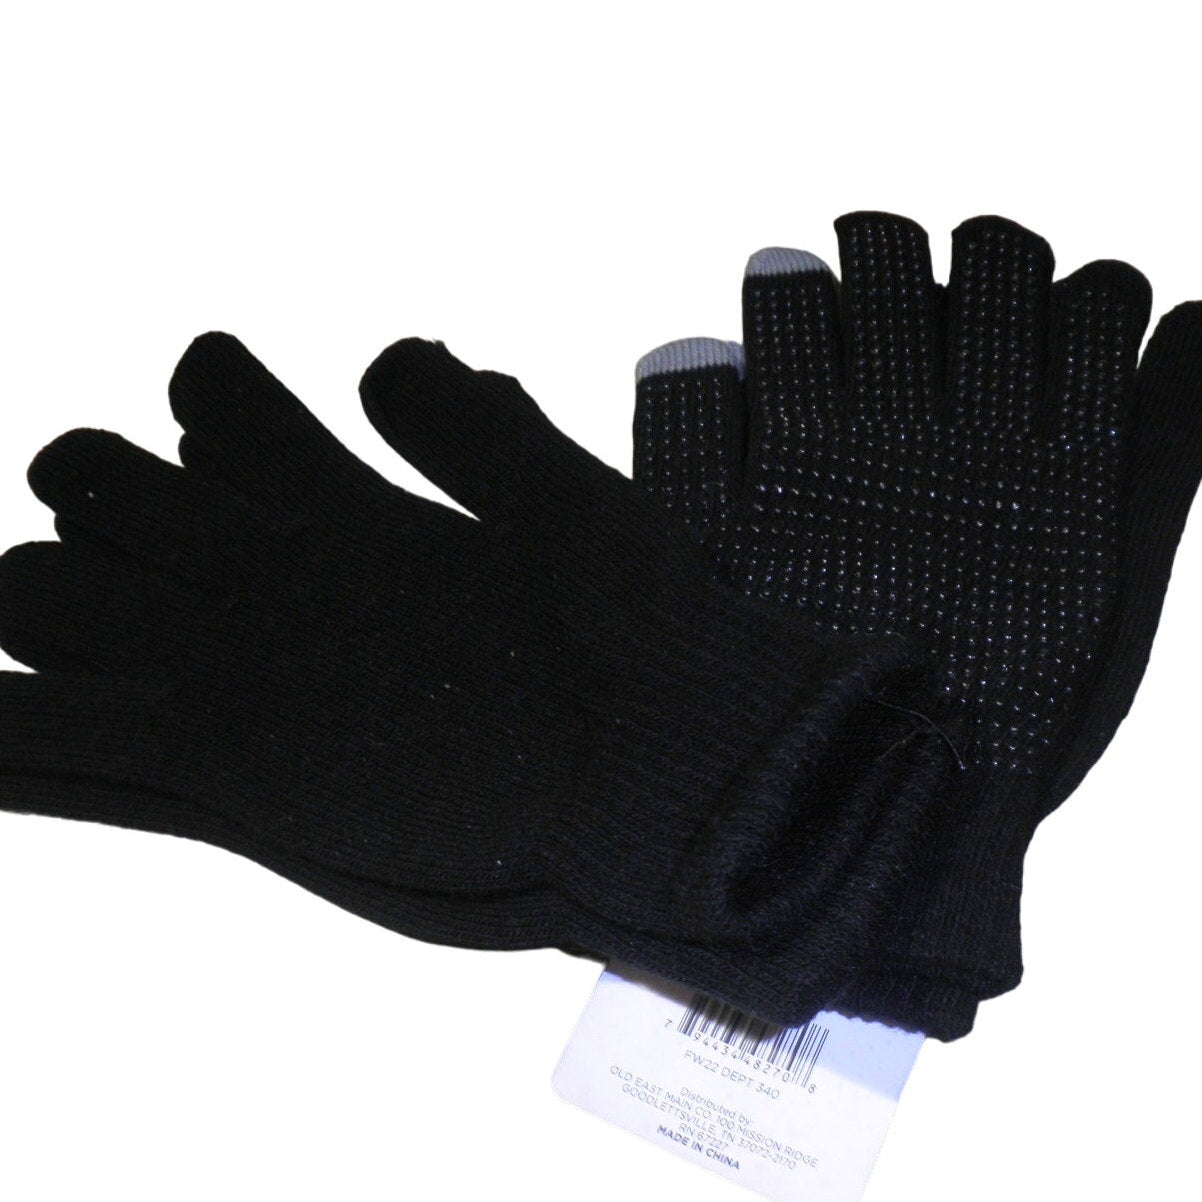 Mens Mission Ridge 2-pack Knitted Gloves, Gripper Palm Gloves, Black, One-Size